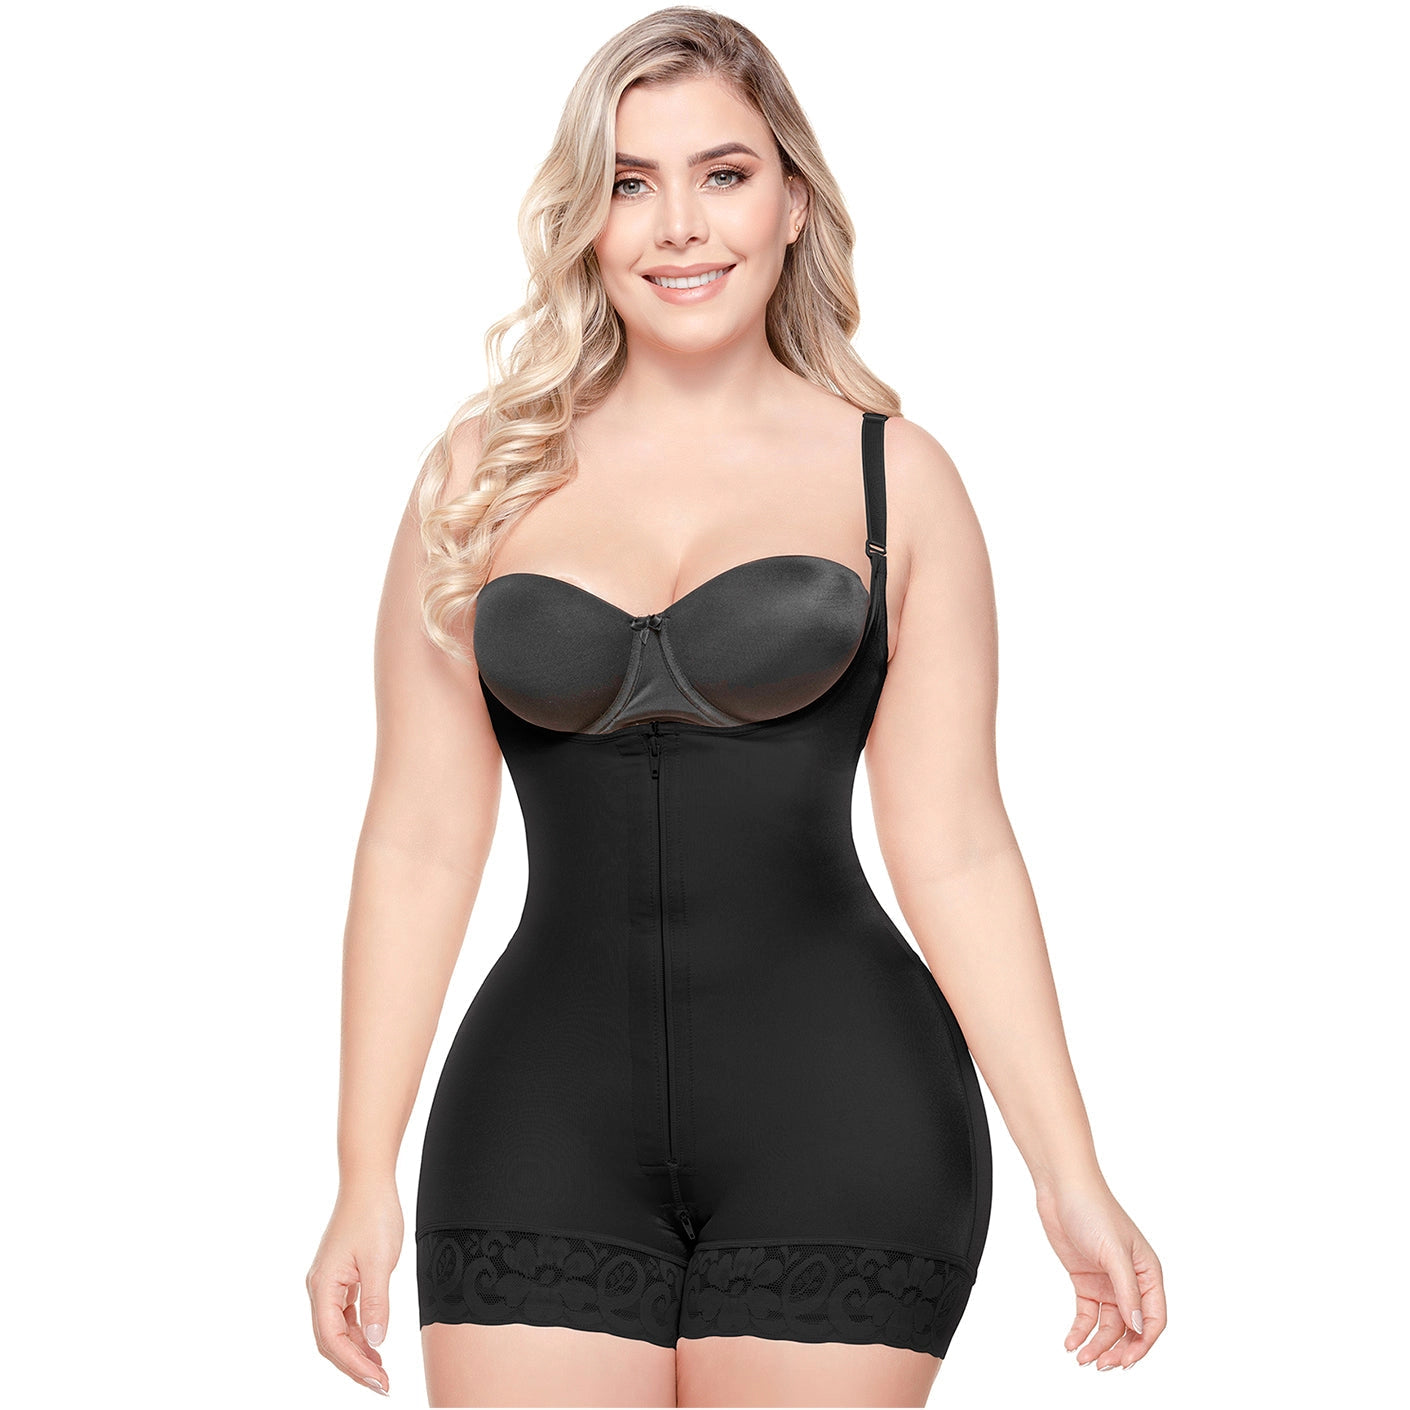 COLOMBIAN BUTT LIFTER SHAPEWEAR BODYSUIT | DRESS NIGHTOUT AND DAILY USE | TRICONET